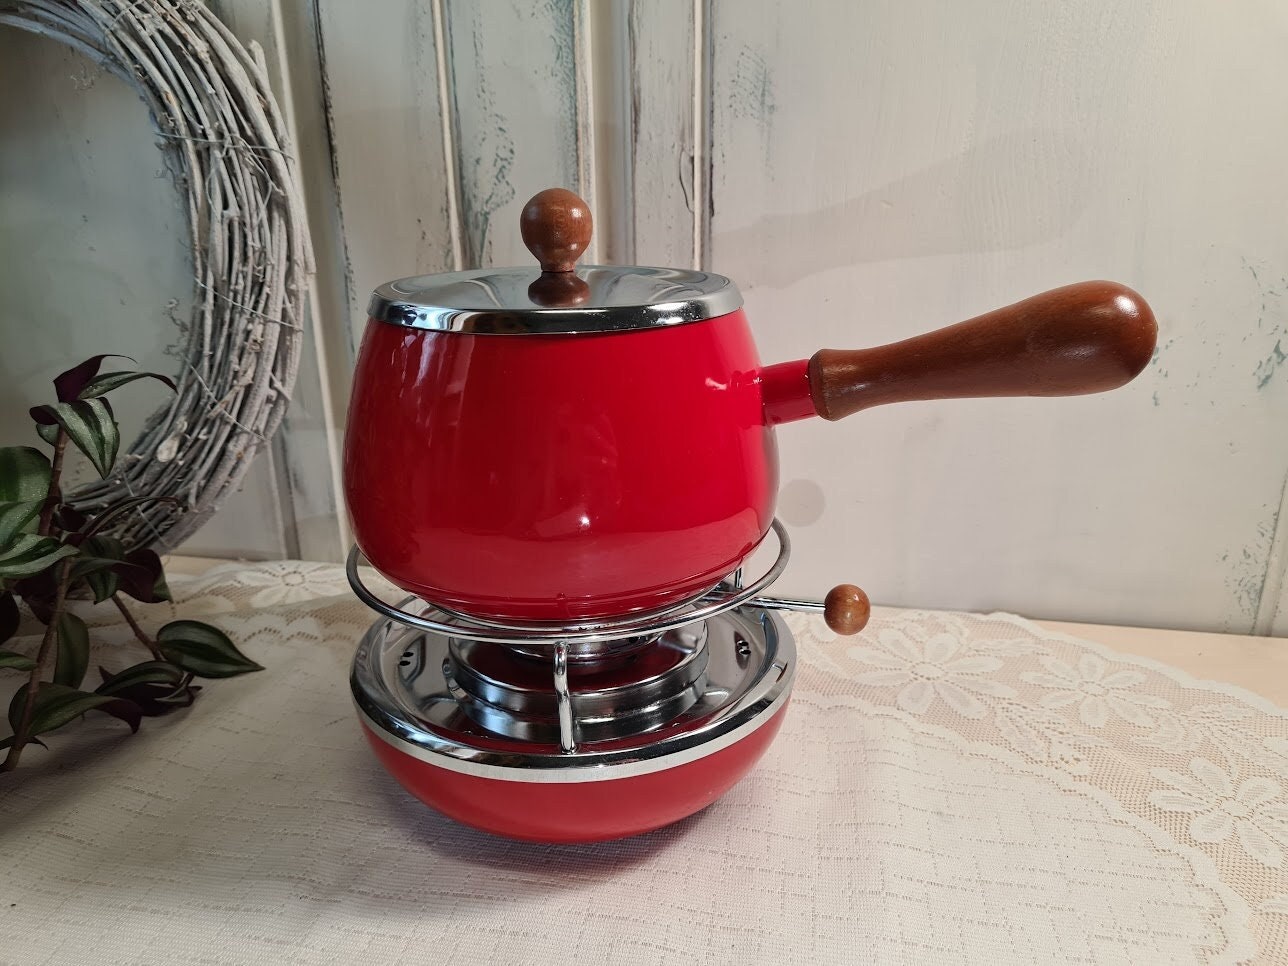 Fondue Sets for sale in Ardmore, Oklahoma, Facebook Marketplace